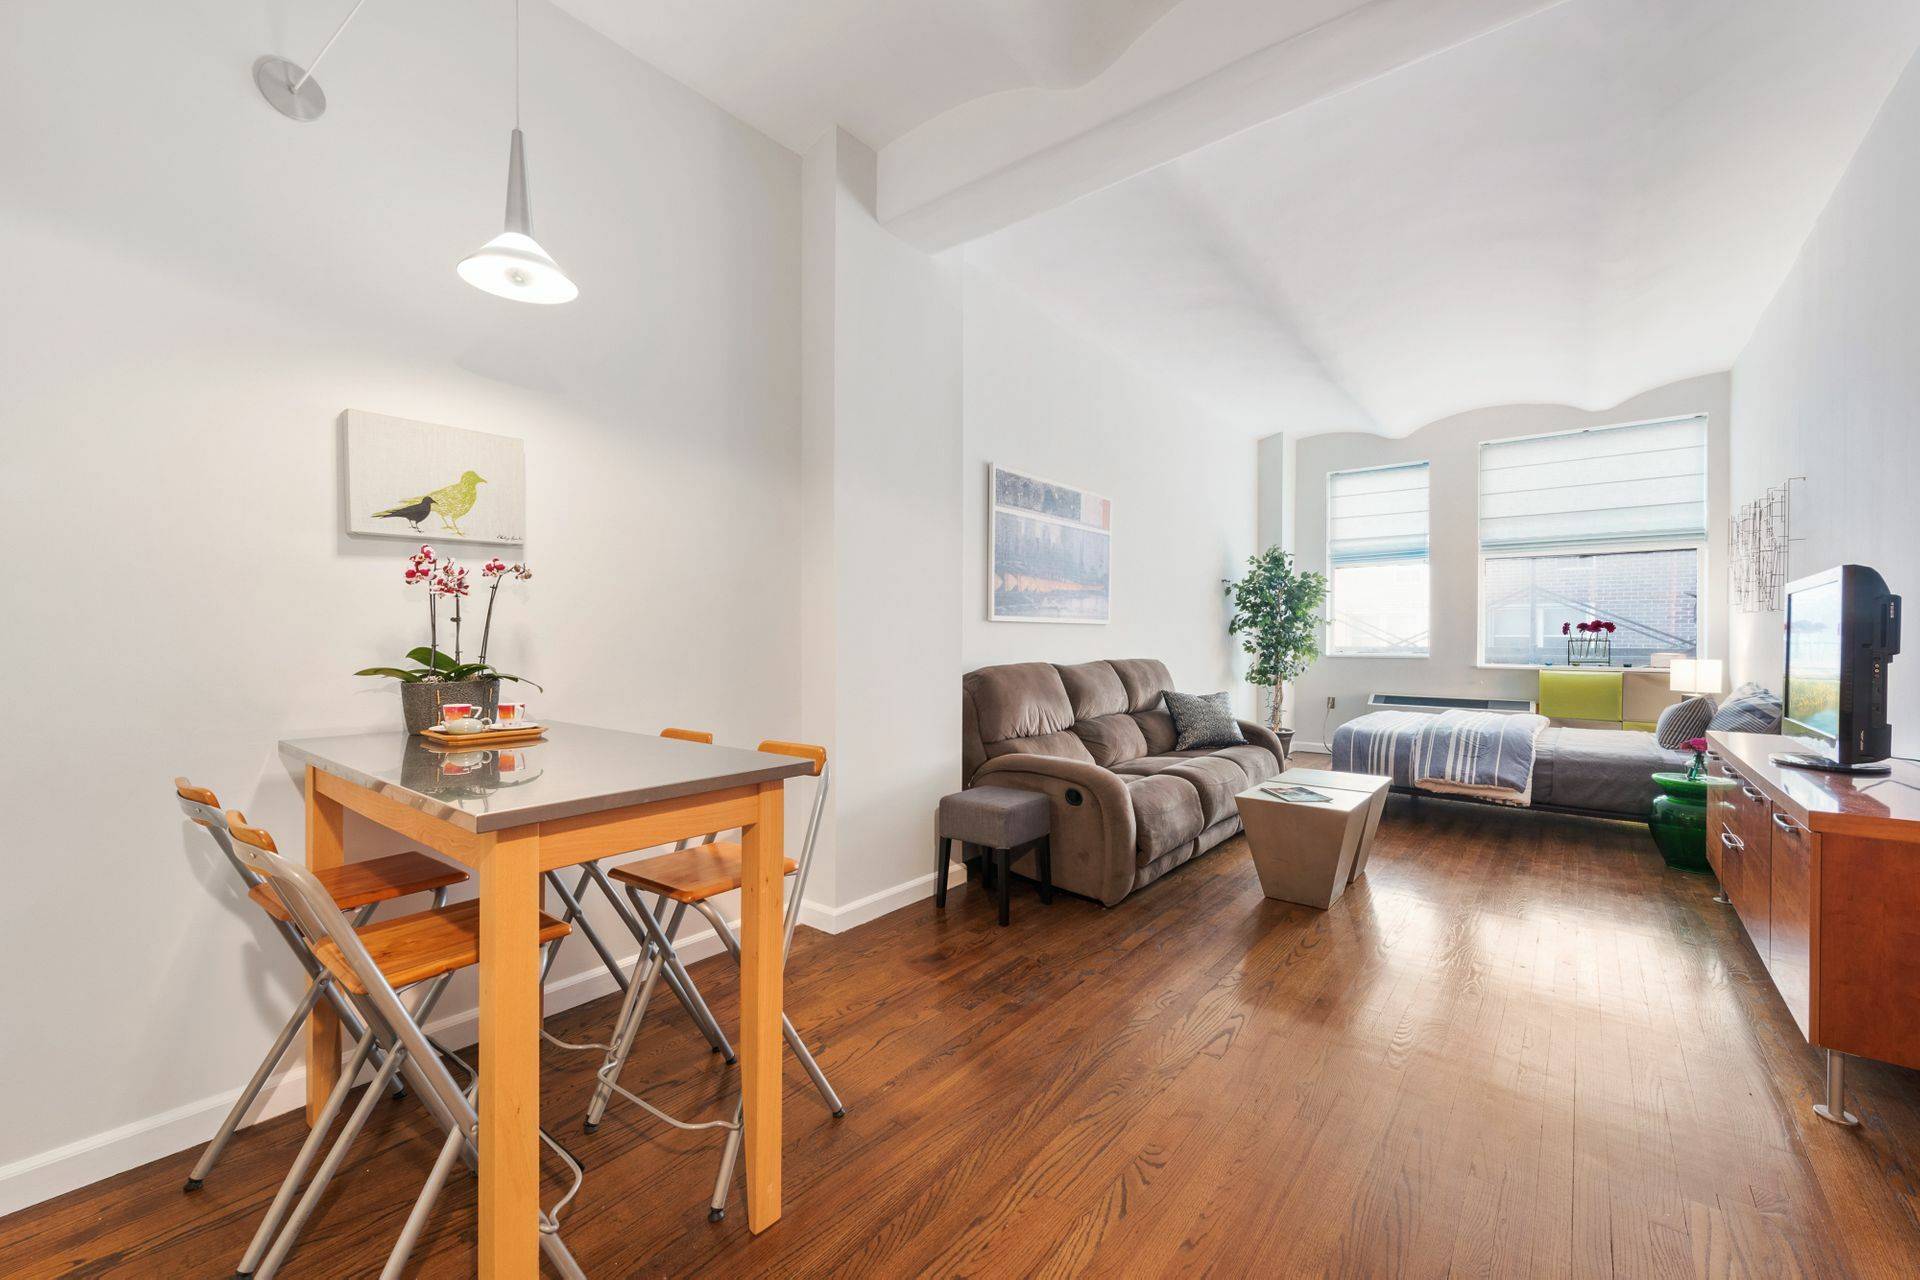 Located in the heart of Historic Greenwich Village, and just steps from Sheridan Square, this wonderful home features 10' 3 barrel vaulted ceilings, brand new oversized windows with Western exposure, ...